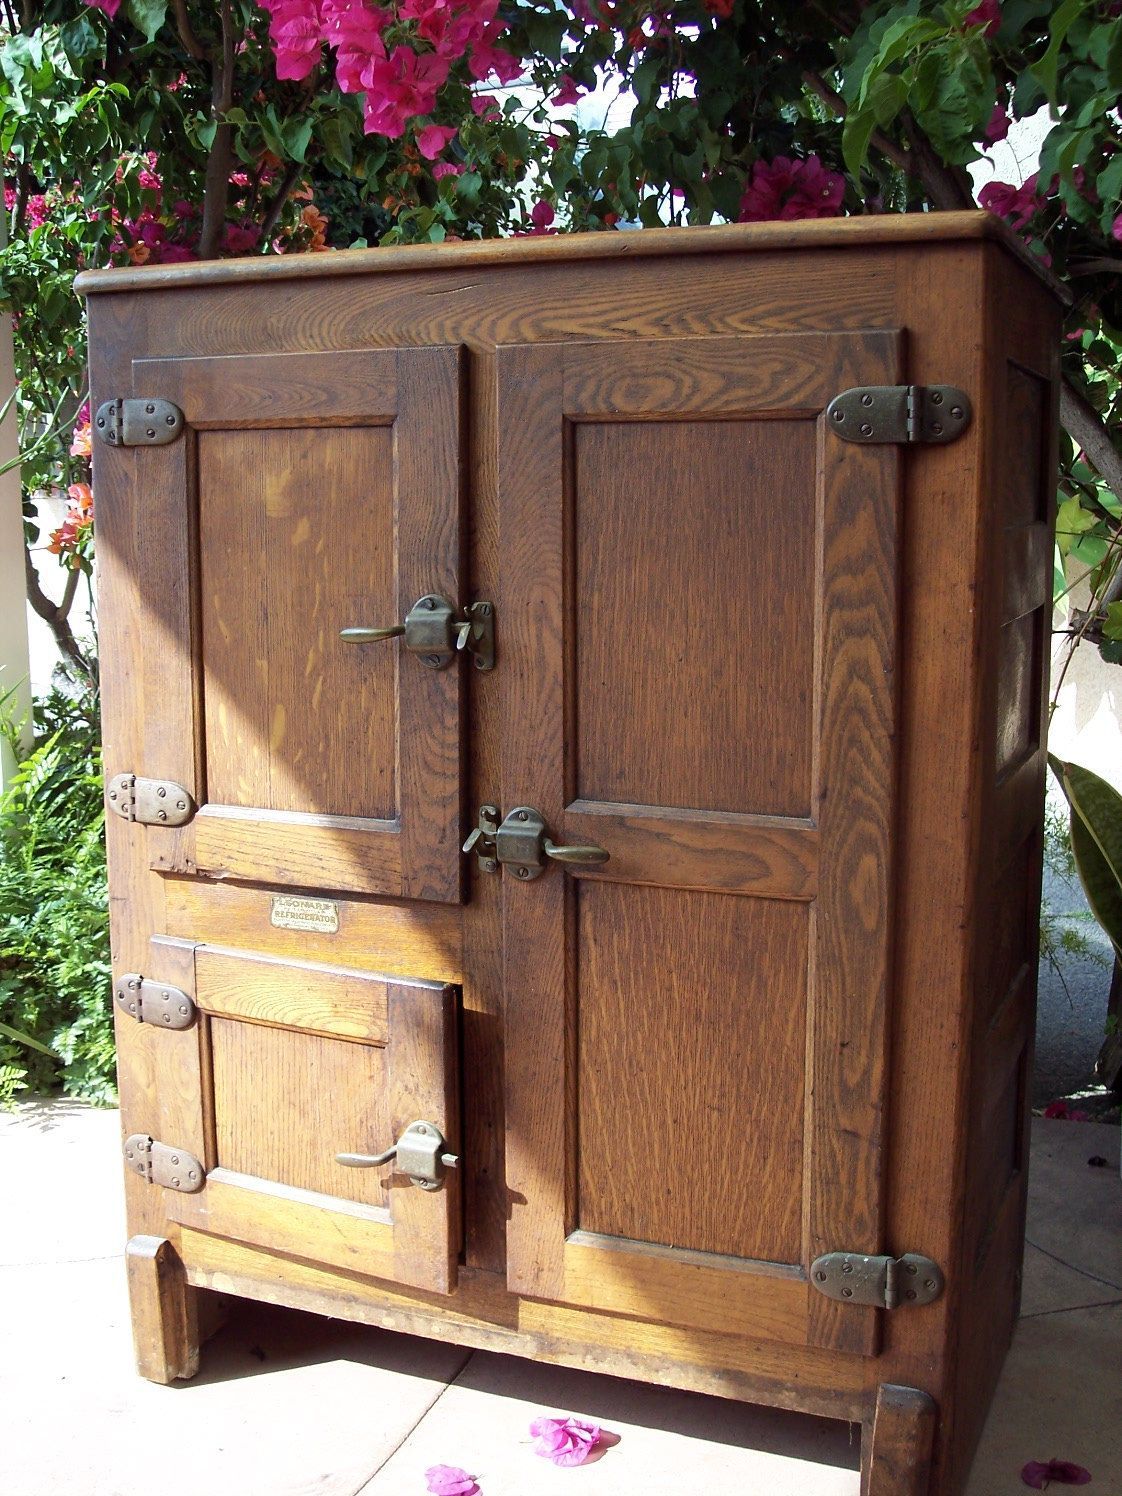 ice box | 1919 Antique 3Door ICE BOX Wood by SouthernCalifornia on Etsy